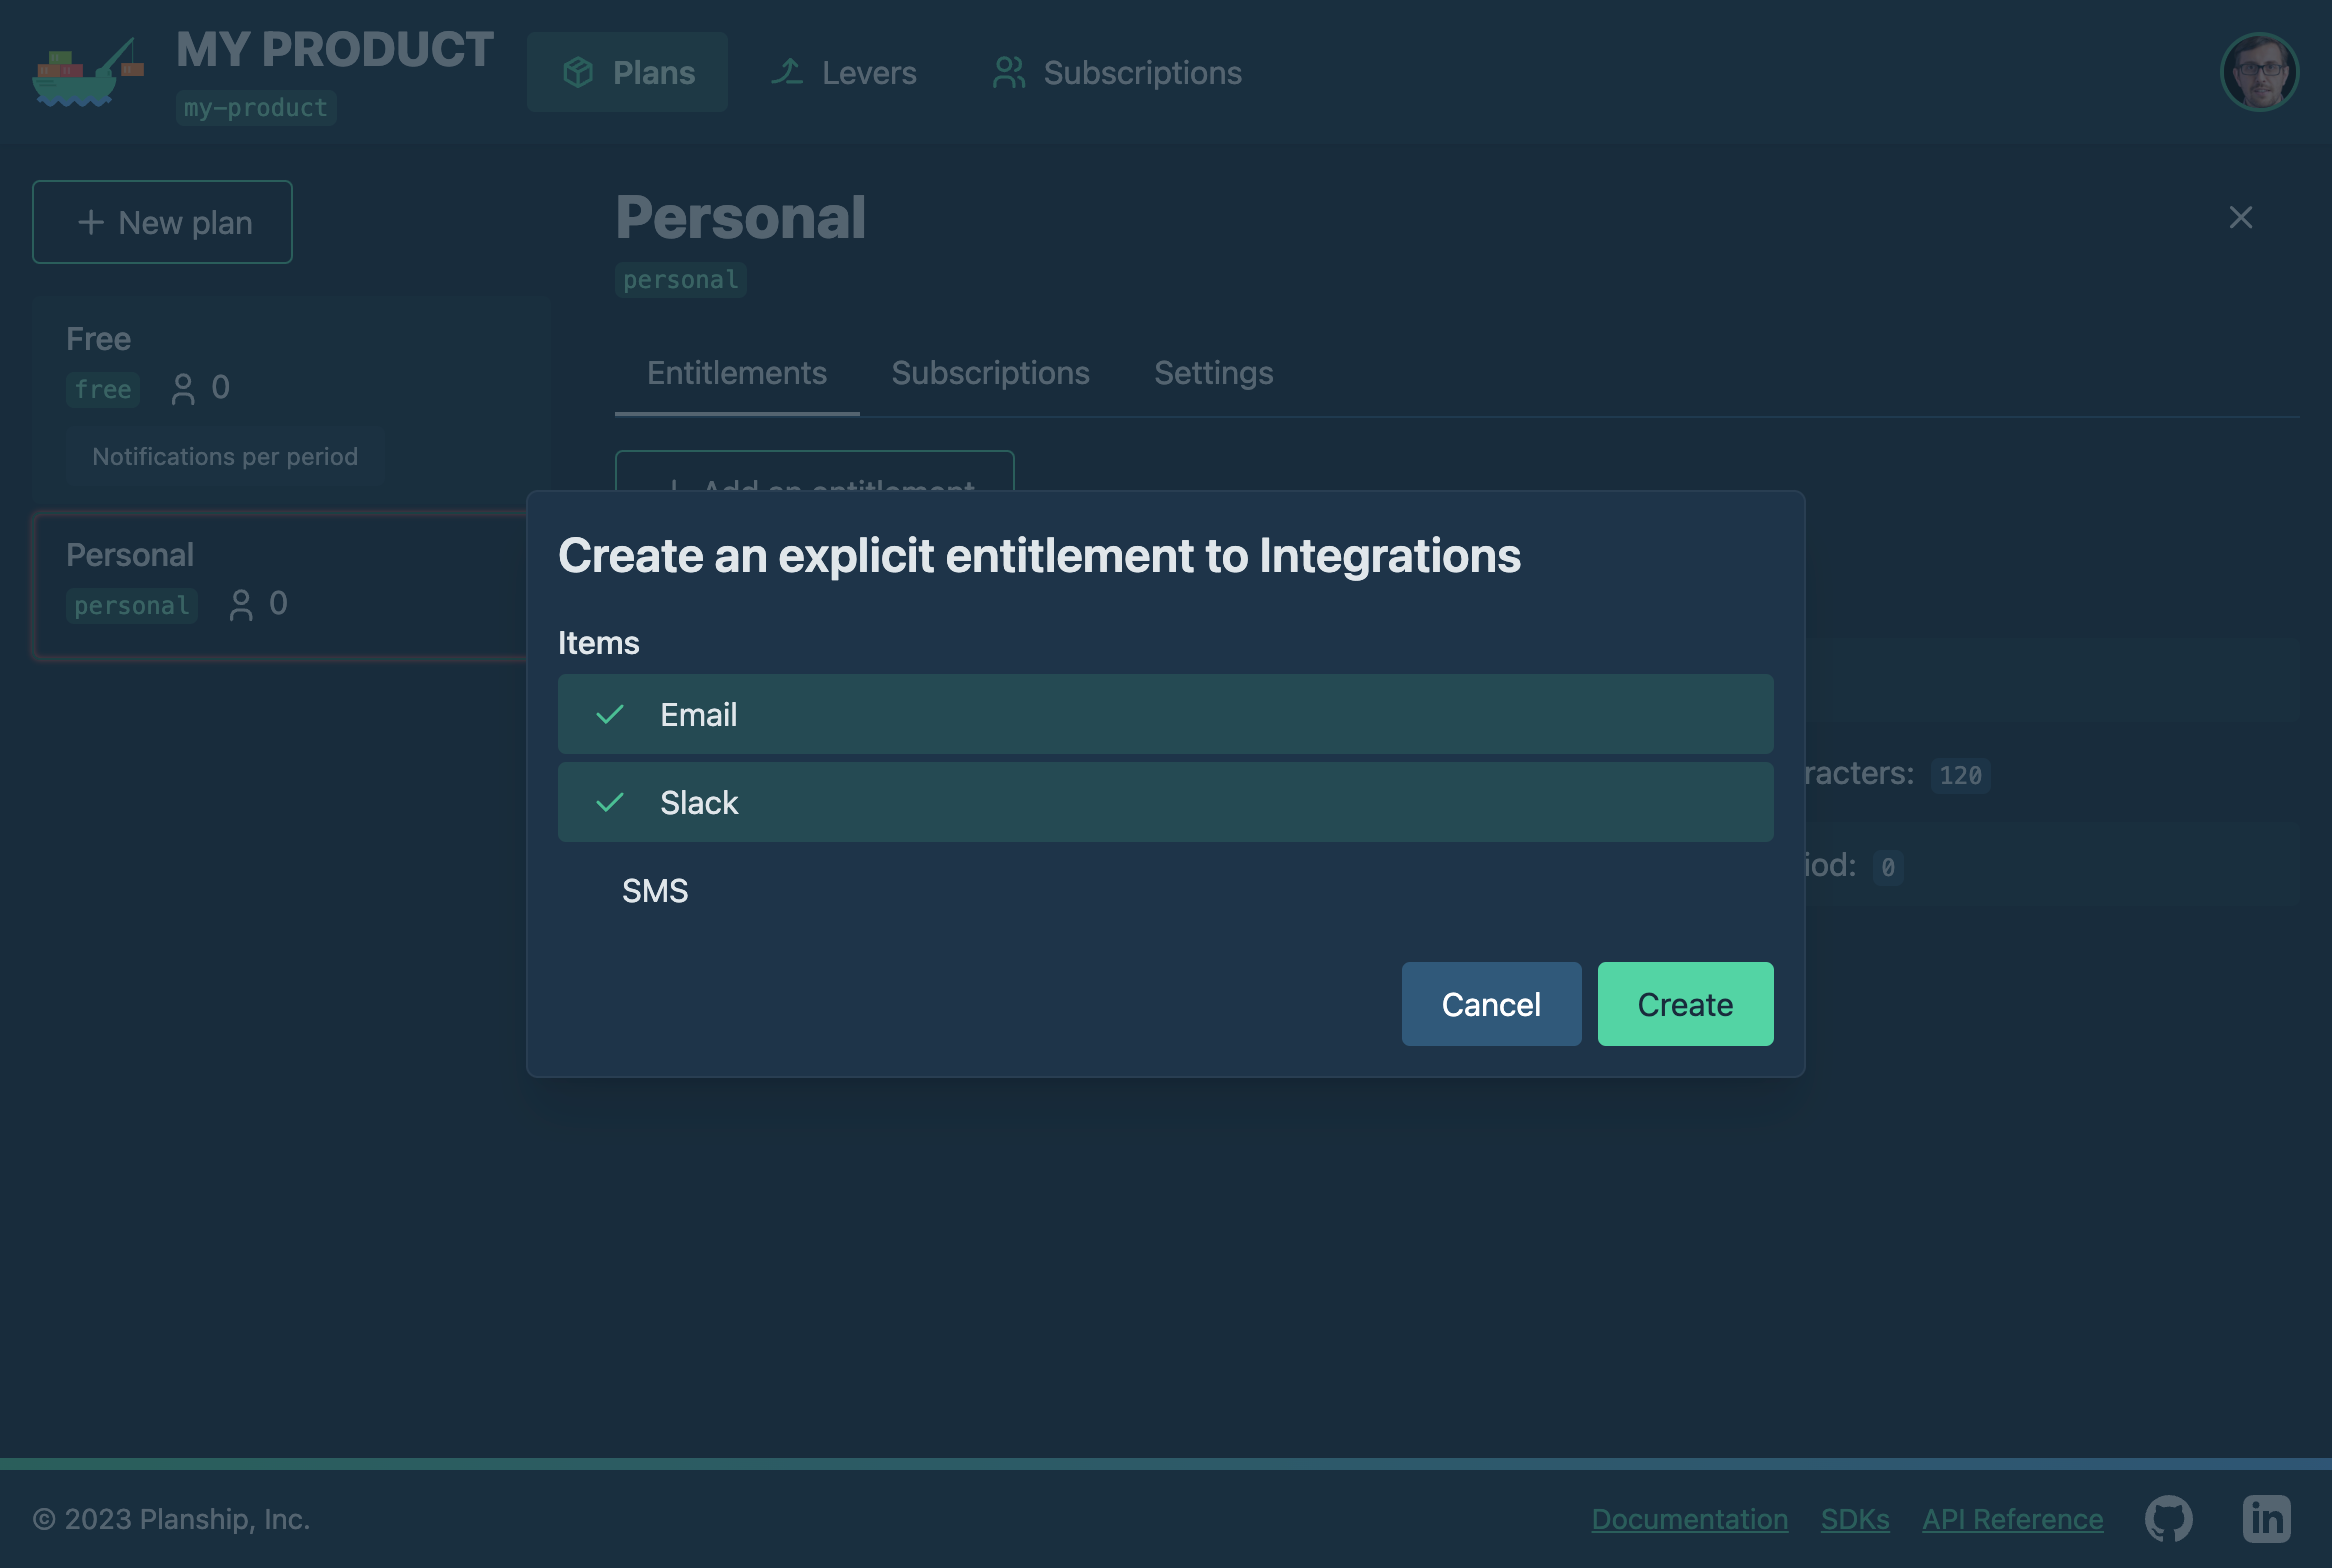 Planship console screenshot showing creation of an explicit entitlement for the **Integrations** lever